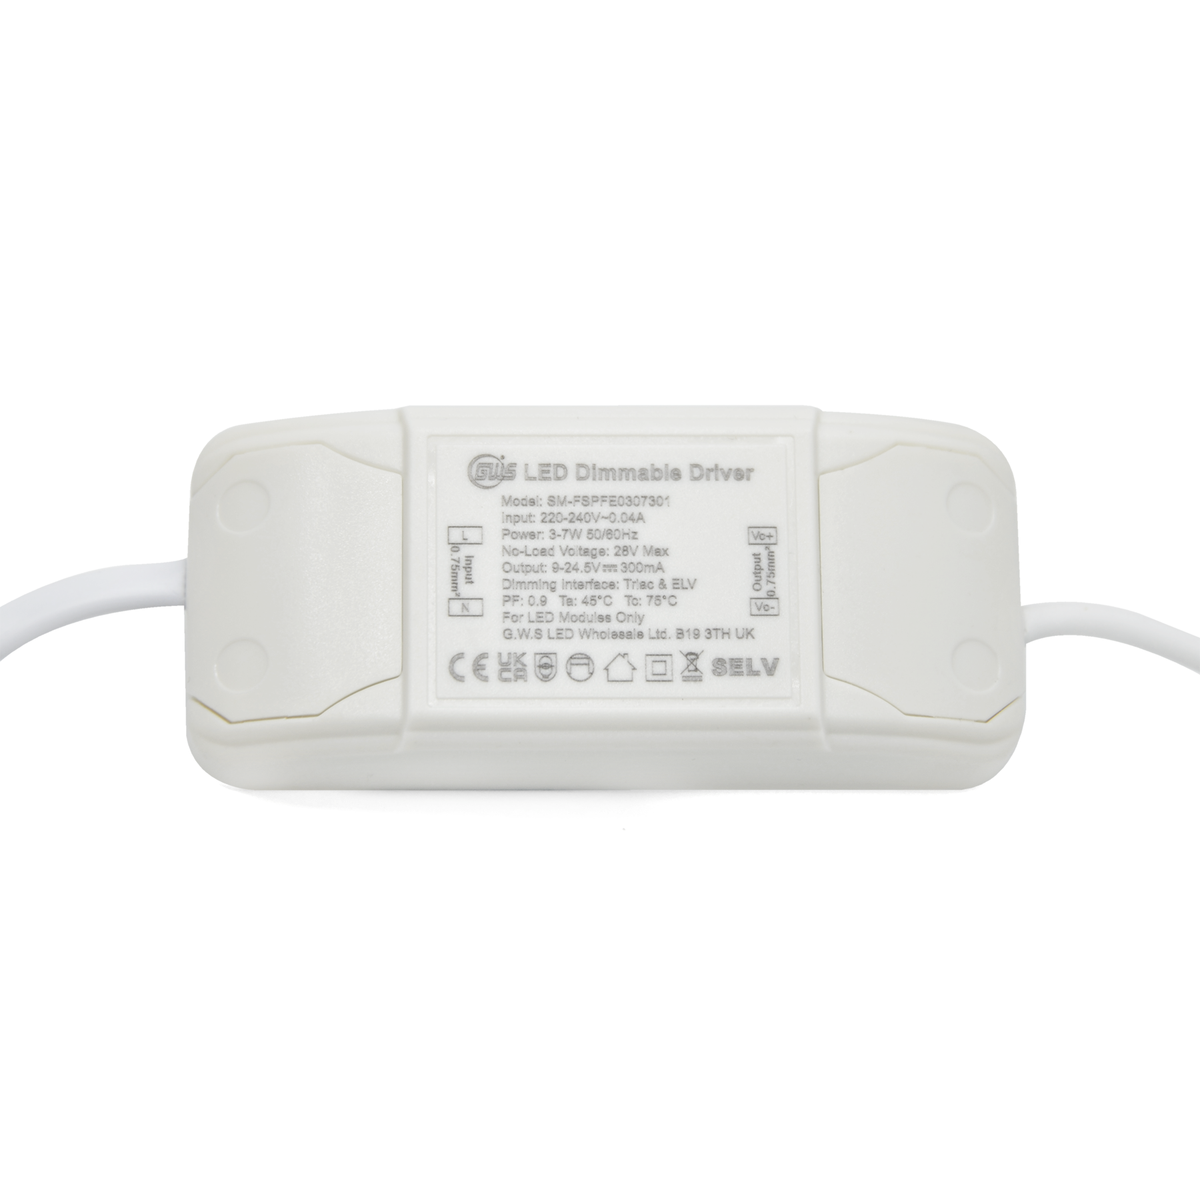 G.W.S LED Wholesale LED Drivers/LED Power Supplies Triac Constant Current LED Dimmable Driver 3-40W